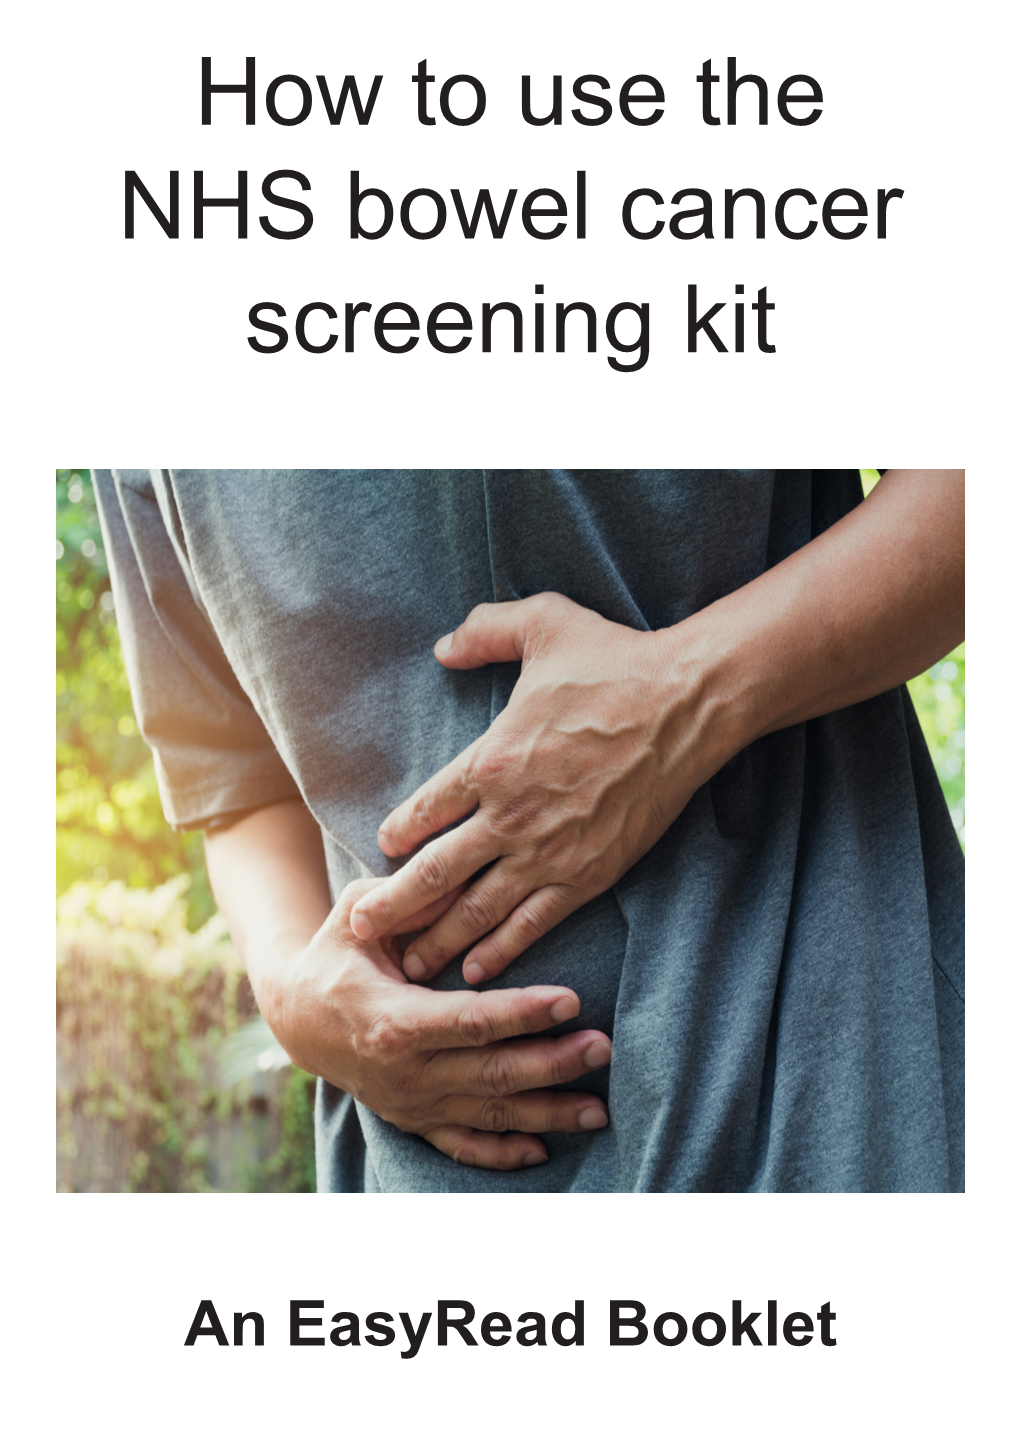 How to Use the NHS Bowel Cancer Screening Kit